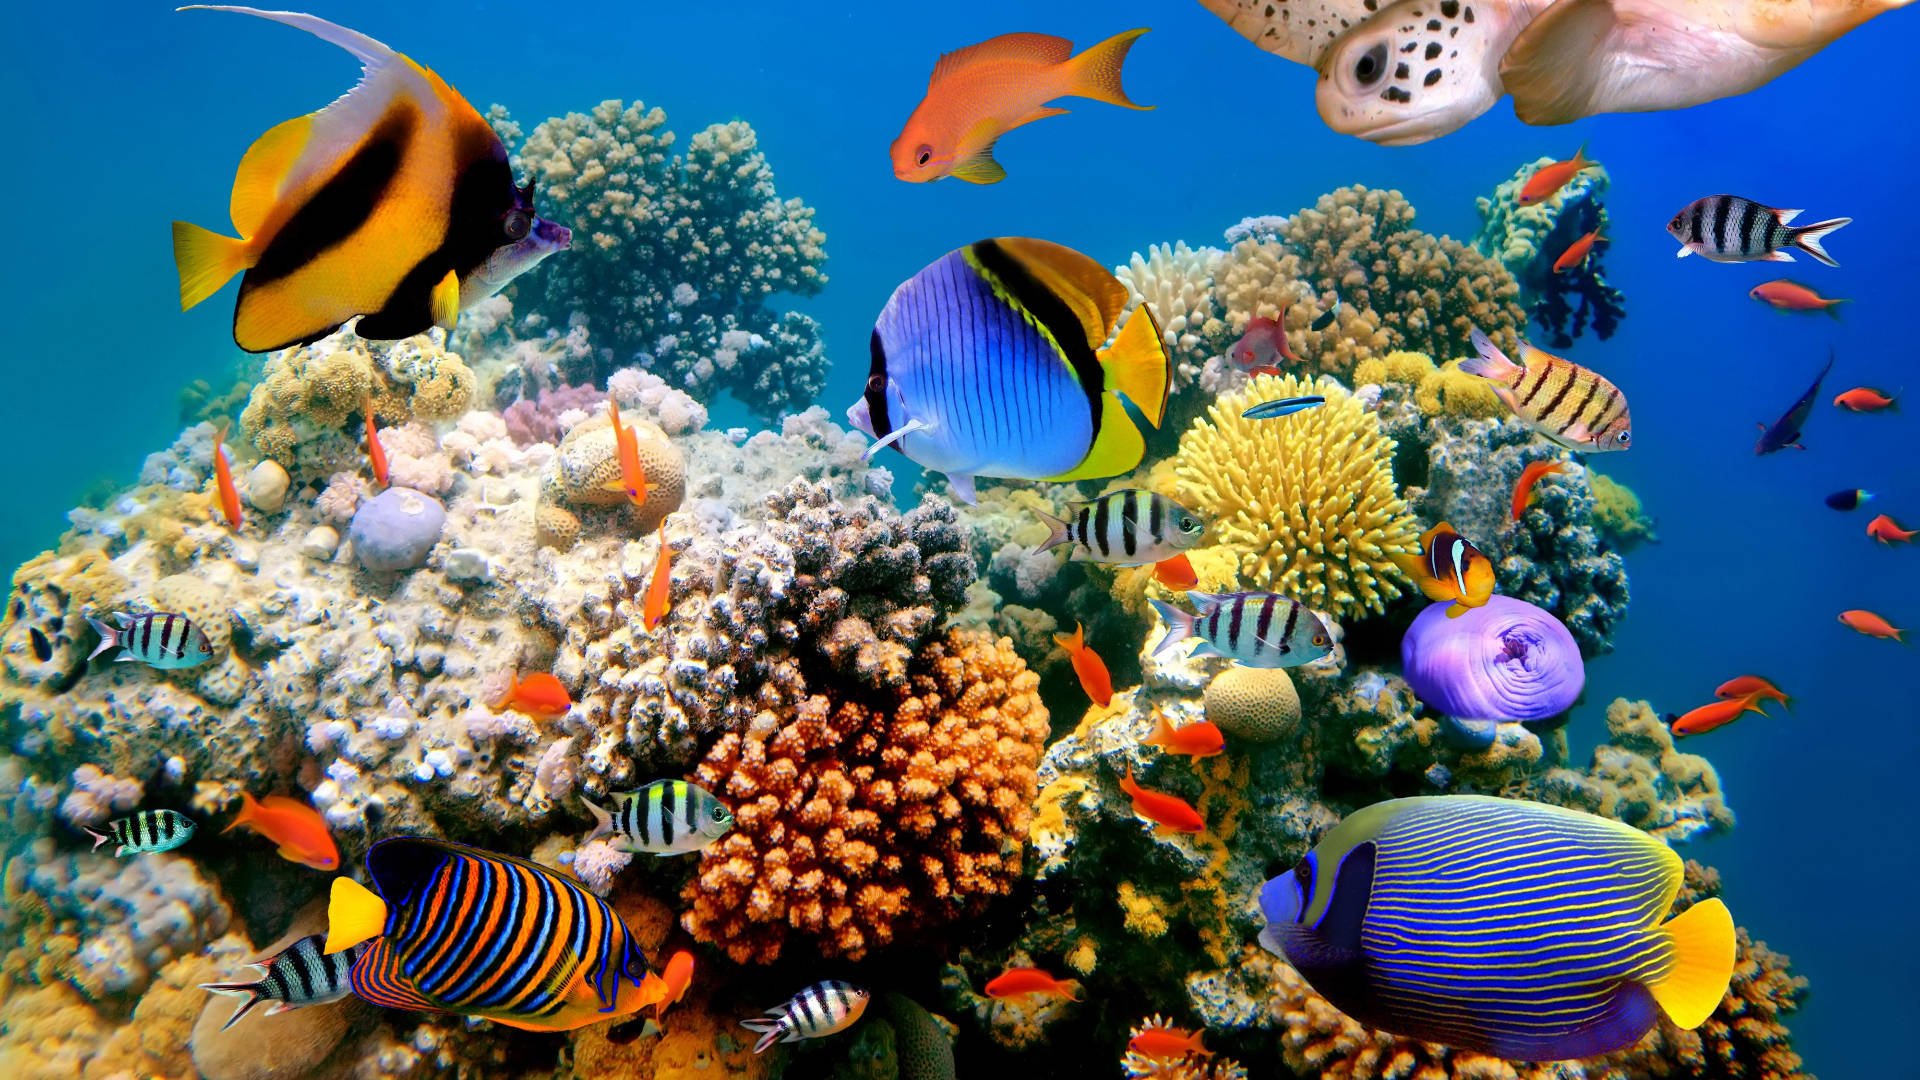 Colorful Display of Underwater Delight Wallpaper